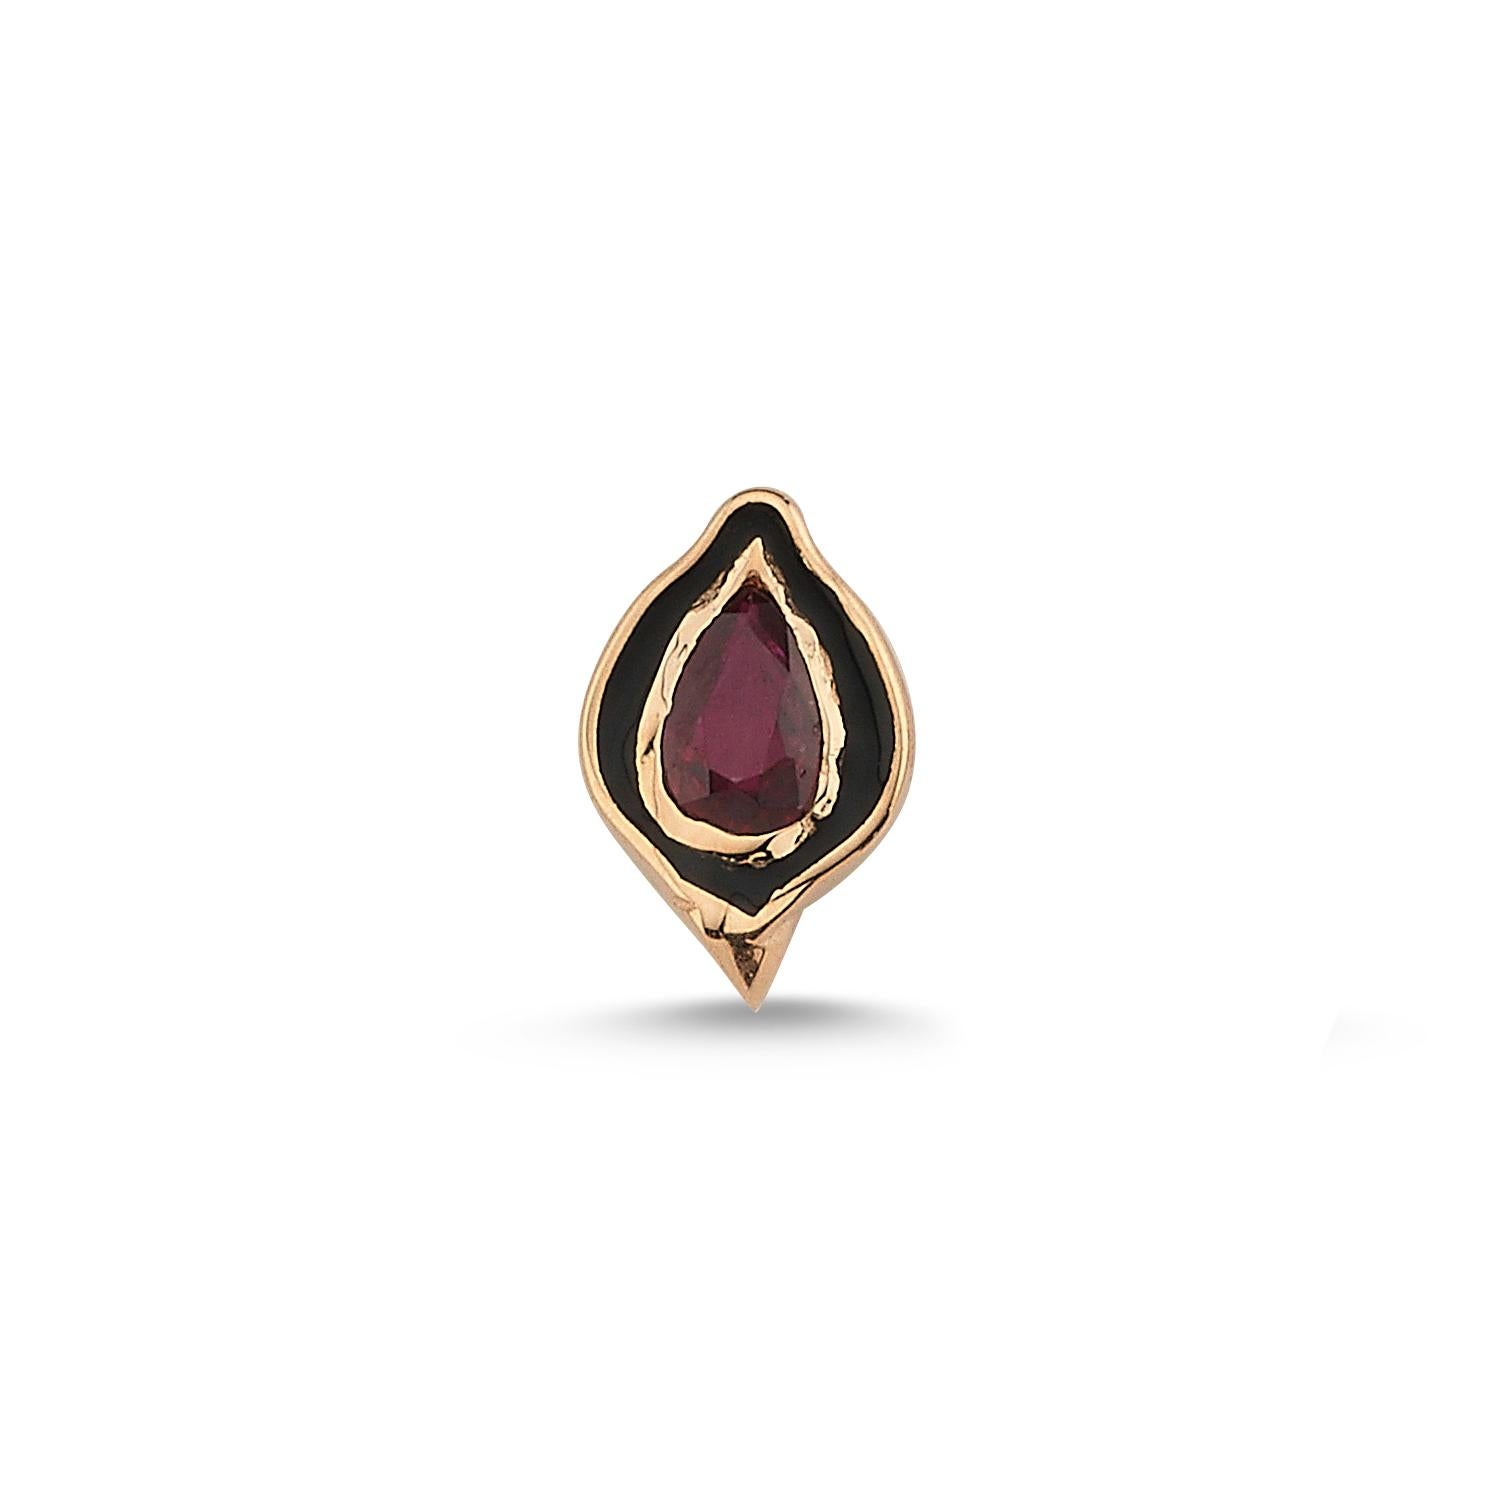 Dragon Lady Collection is inspired by the fire element which is one of the elements that represents our life energy. The main form of the collection is dragon; it is the symbol of strength, courage and prosperity. 

Baby dragon ruby stud earrings in